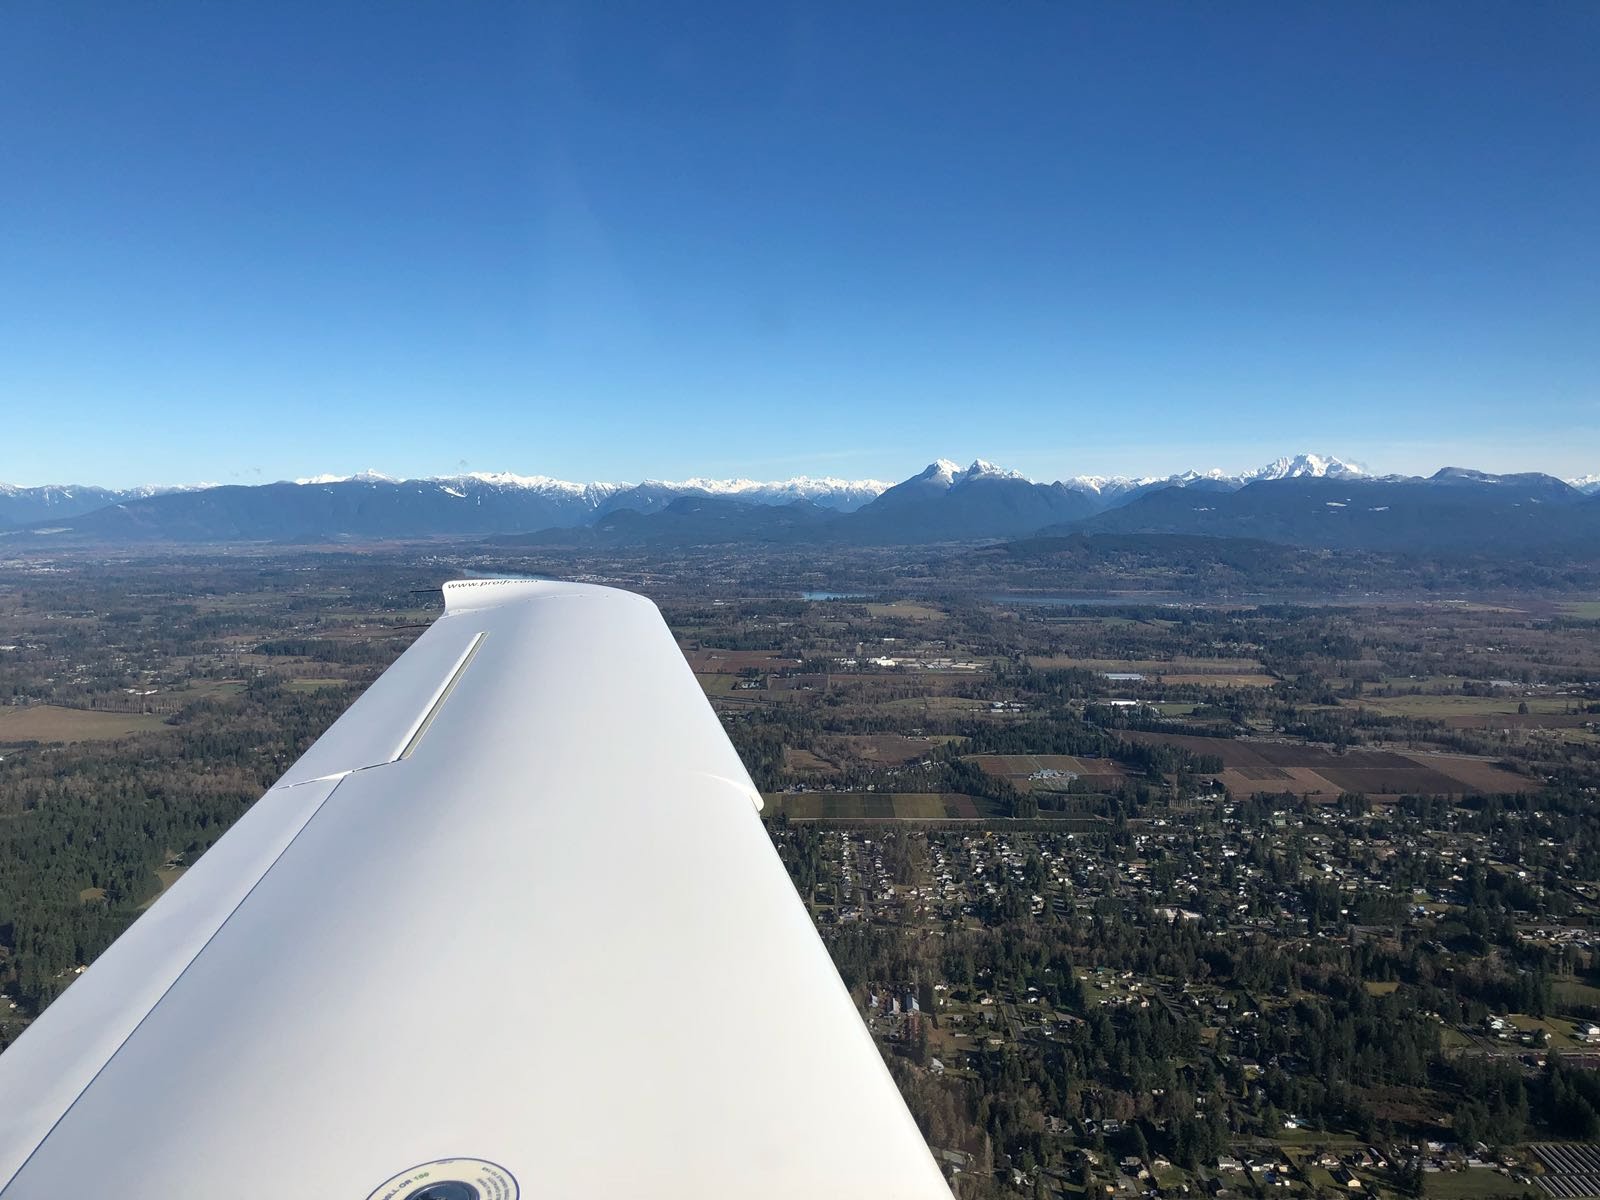 Cirrus SR-20 and Rocky Mountain